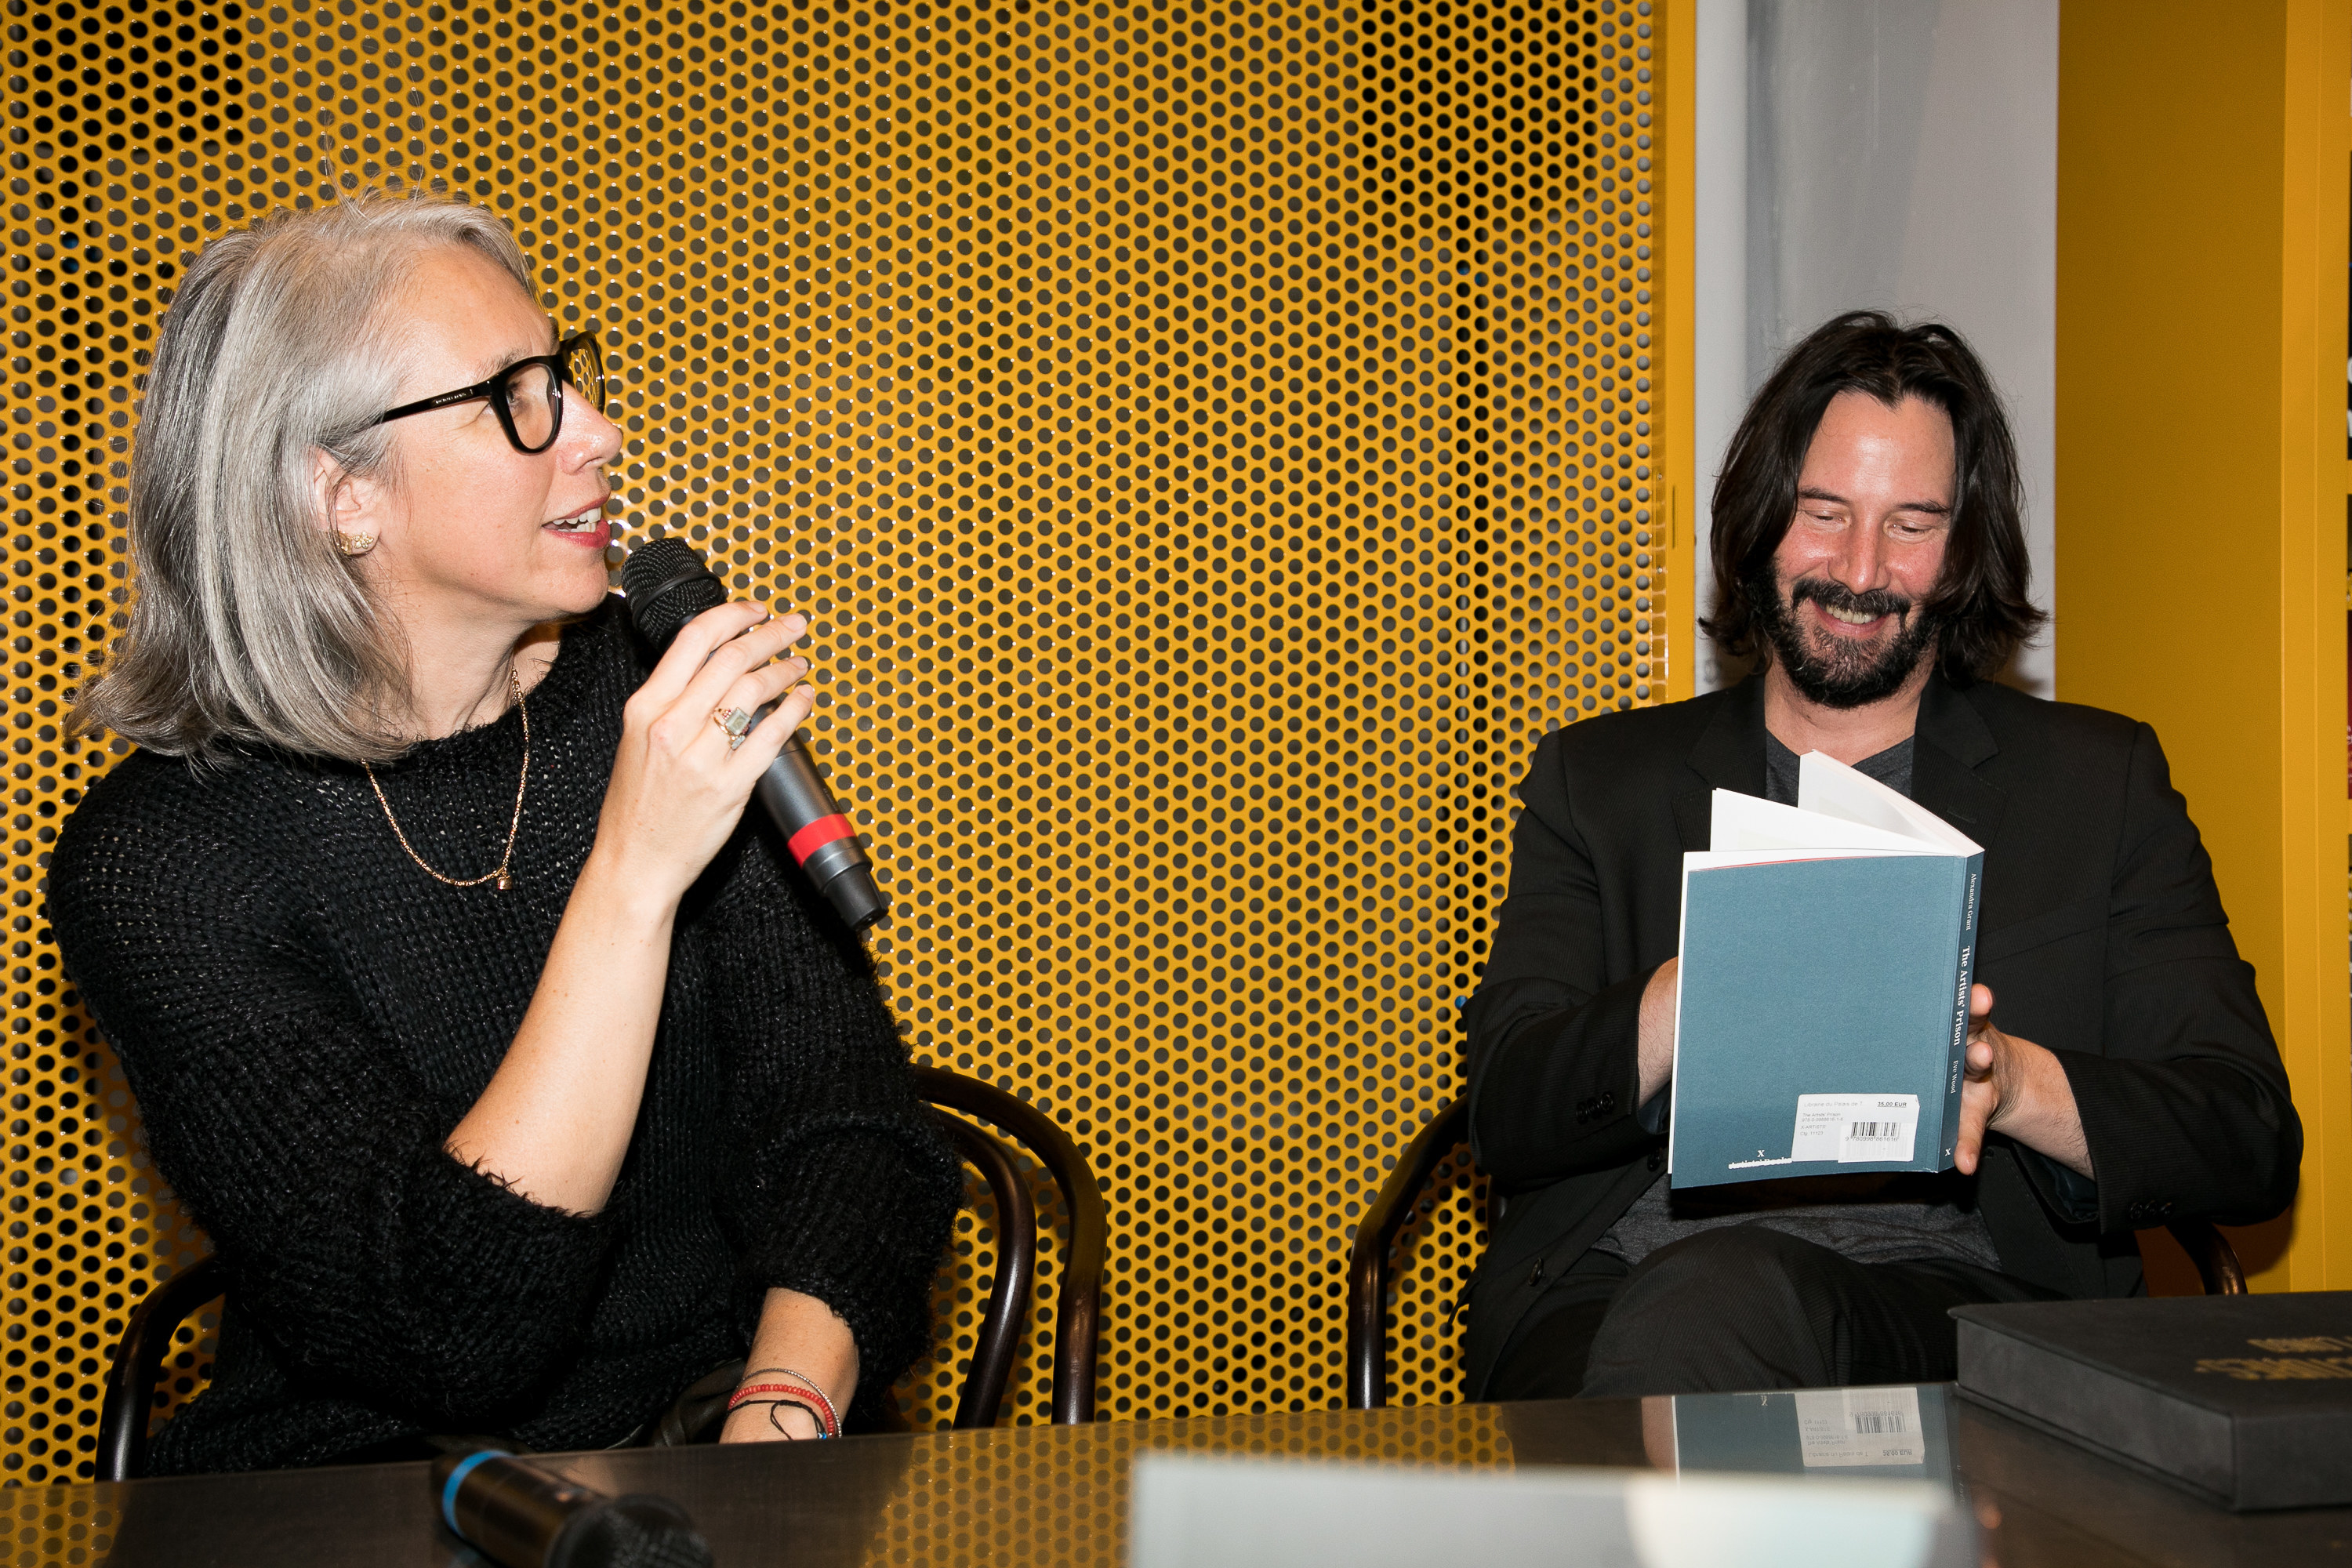 Alexandra speaks into a microphone while Keanu opens a copy of one of their books